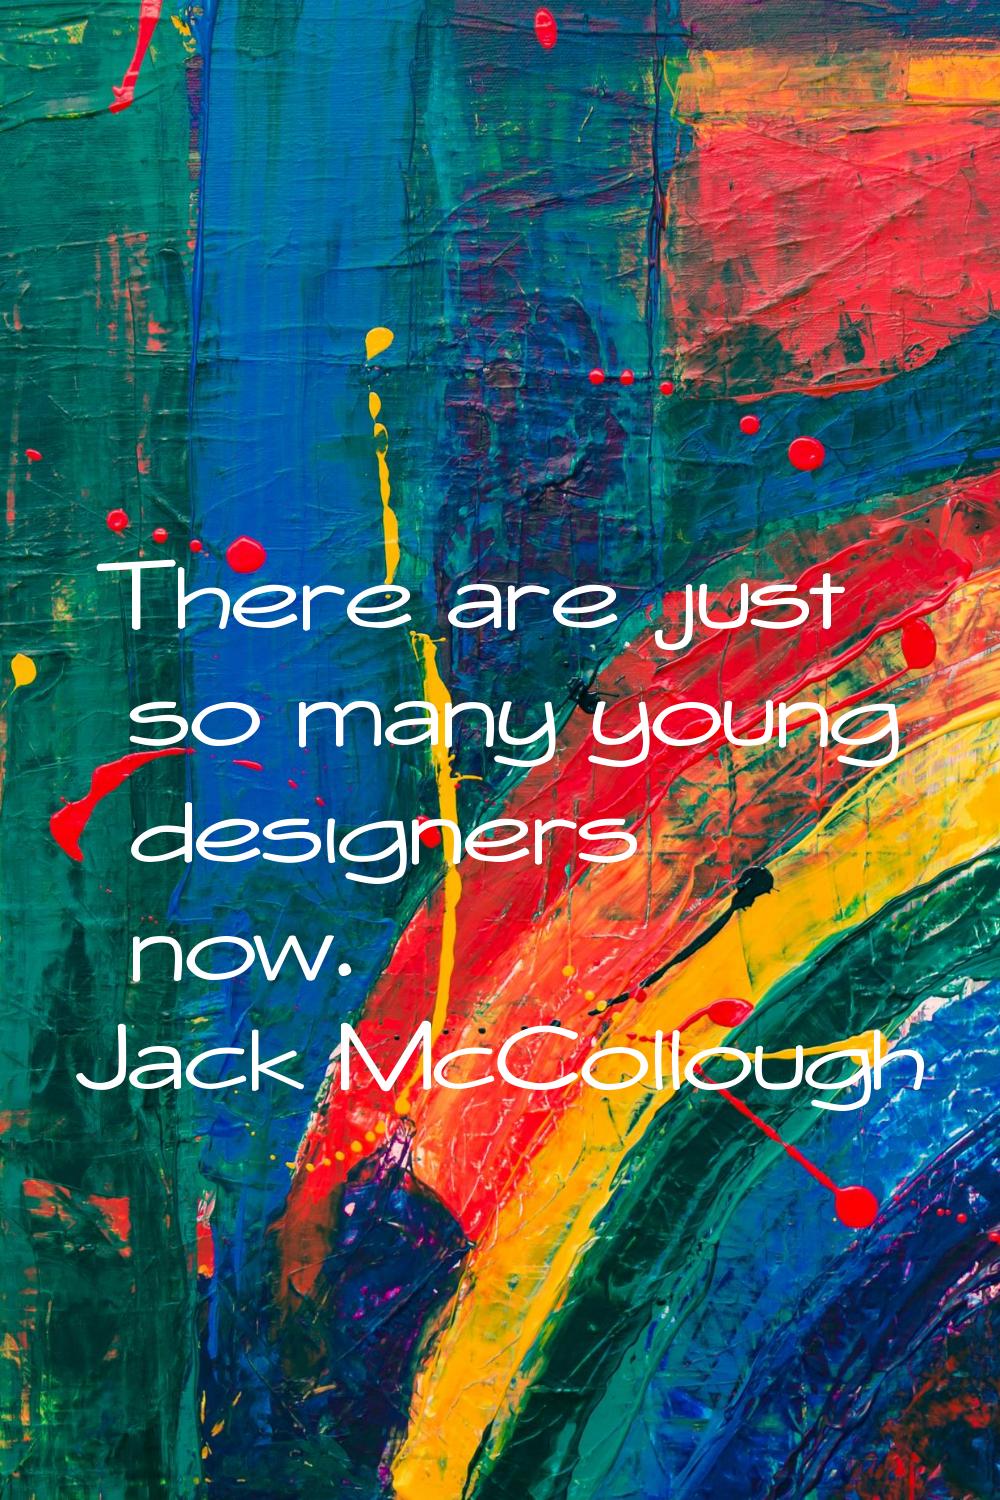 There are just so many young designers now.